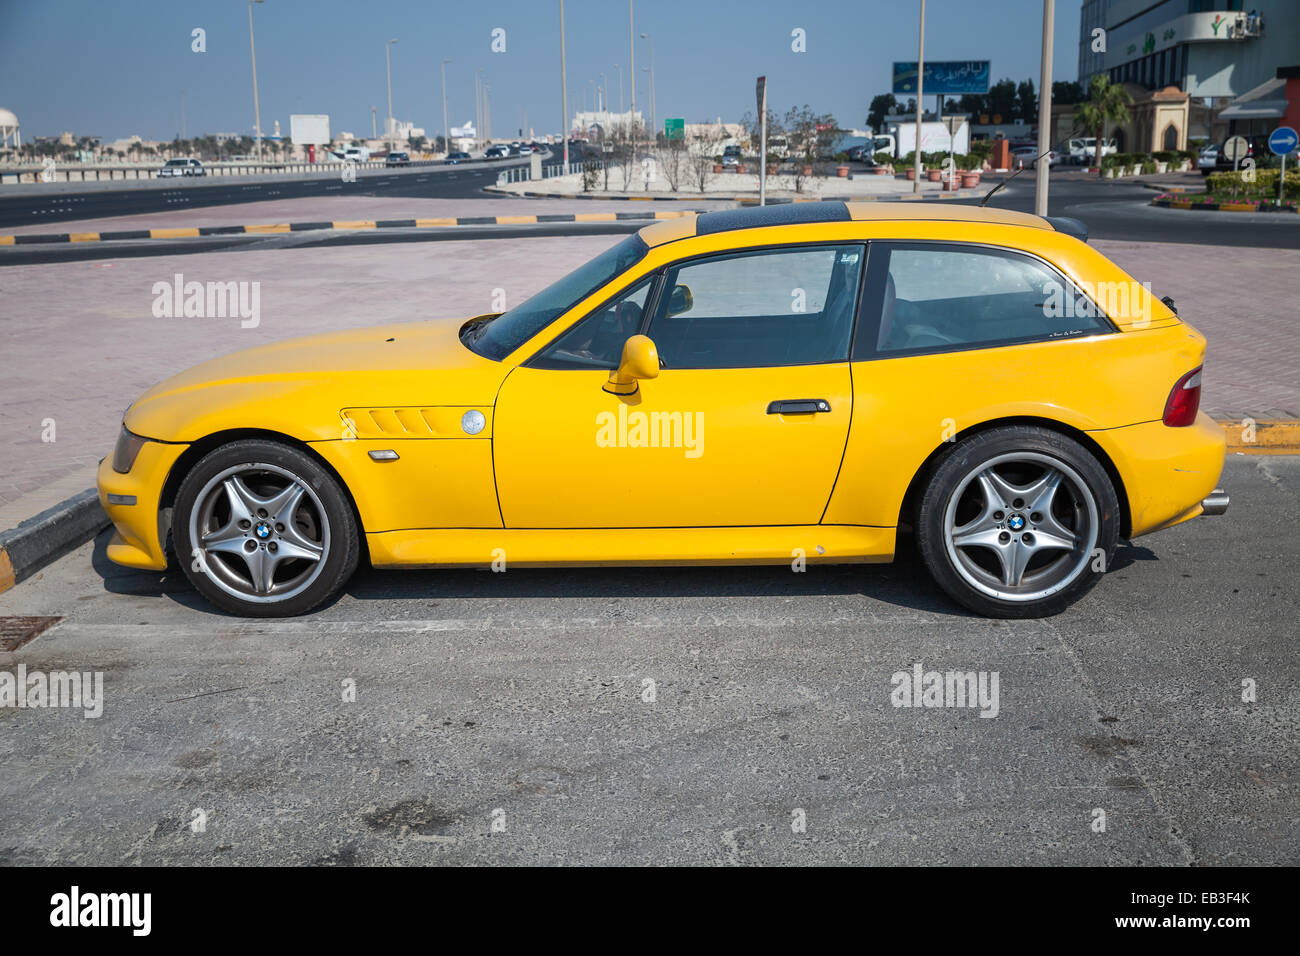 Manama, Bahrain - November 21, 2014: Yellow BMW Z3 M Coupe car stands parked on the roadside in Manama Stock Photo